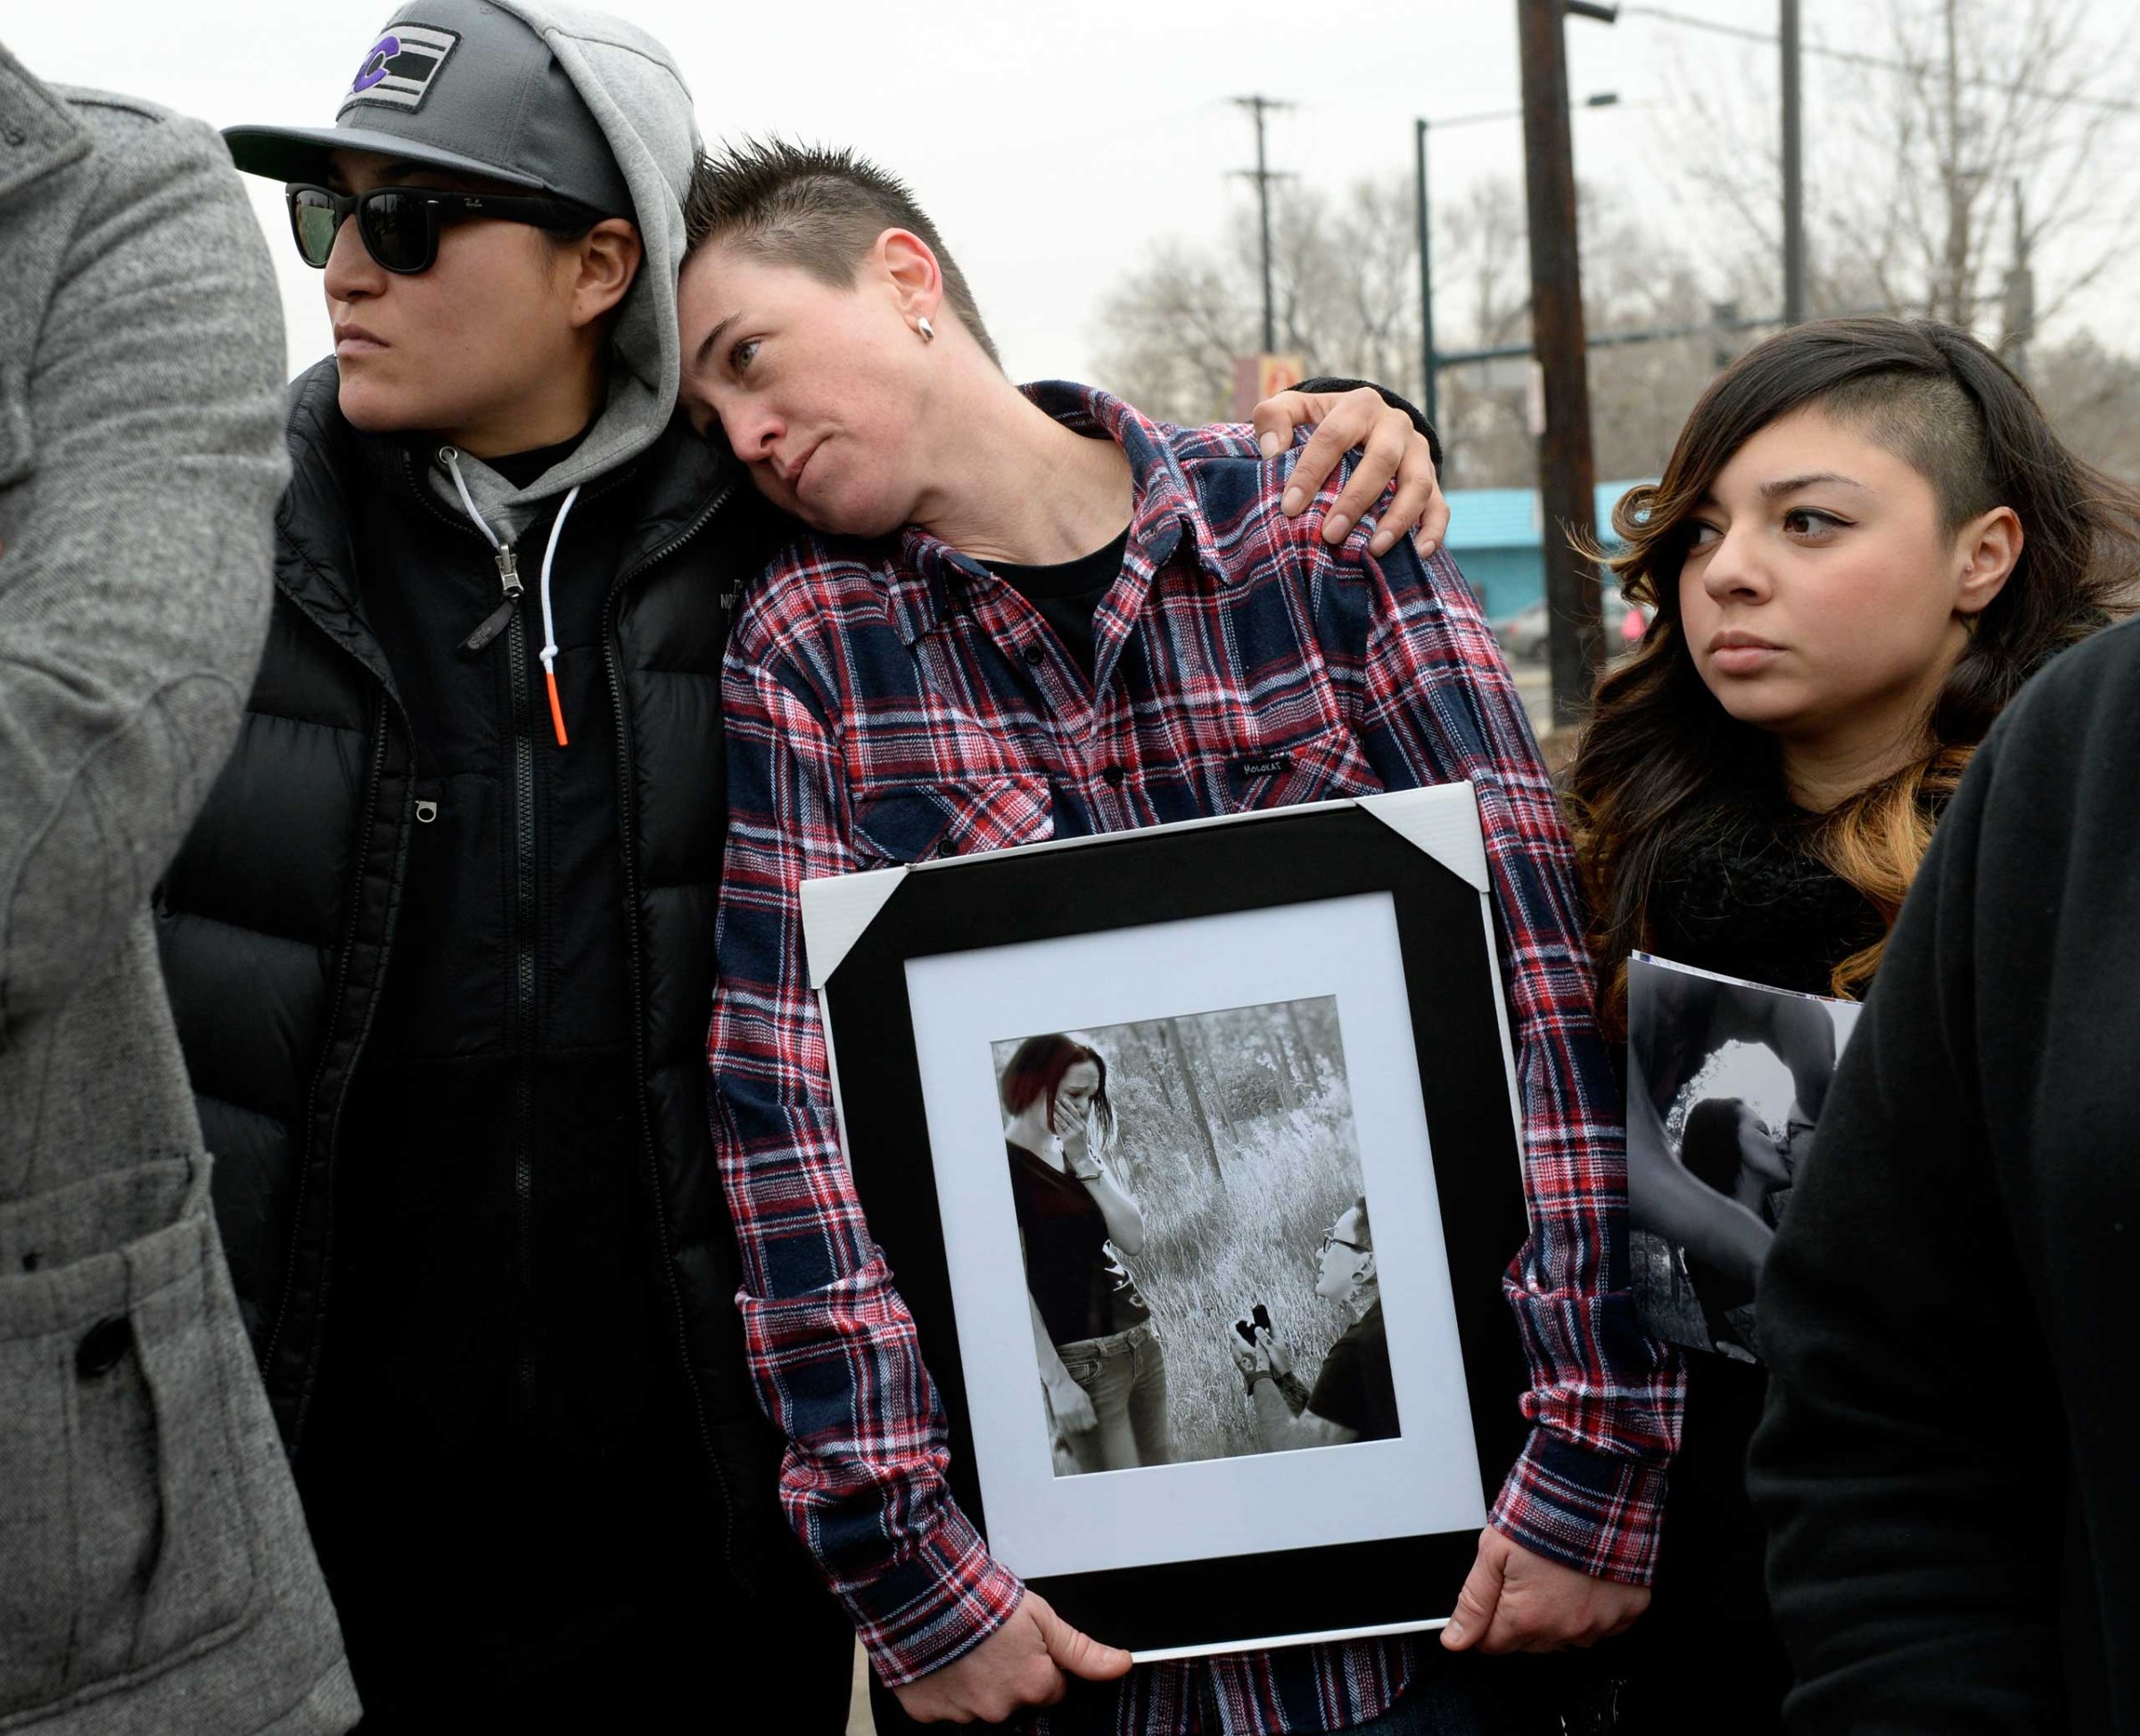 Cheyenne Poorbear, Samantha Getman and Victoria Quintana display photographs of Vanessa Collier and her partner, Christina Higley, during a rally outside New Hope Ministries in Lakewood, Colo. Jan. 13, 2015.